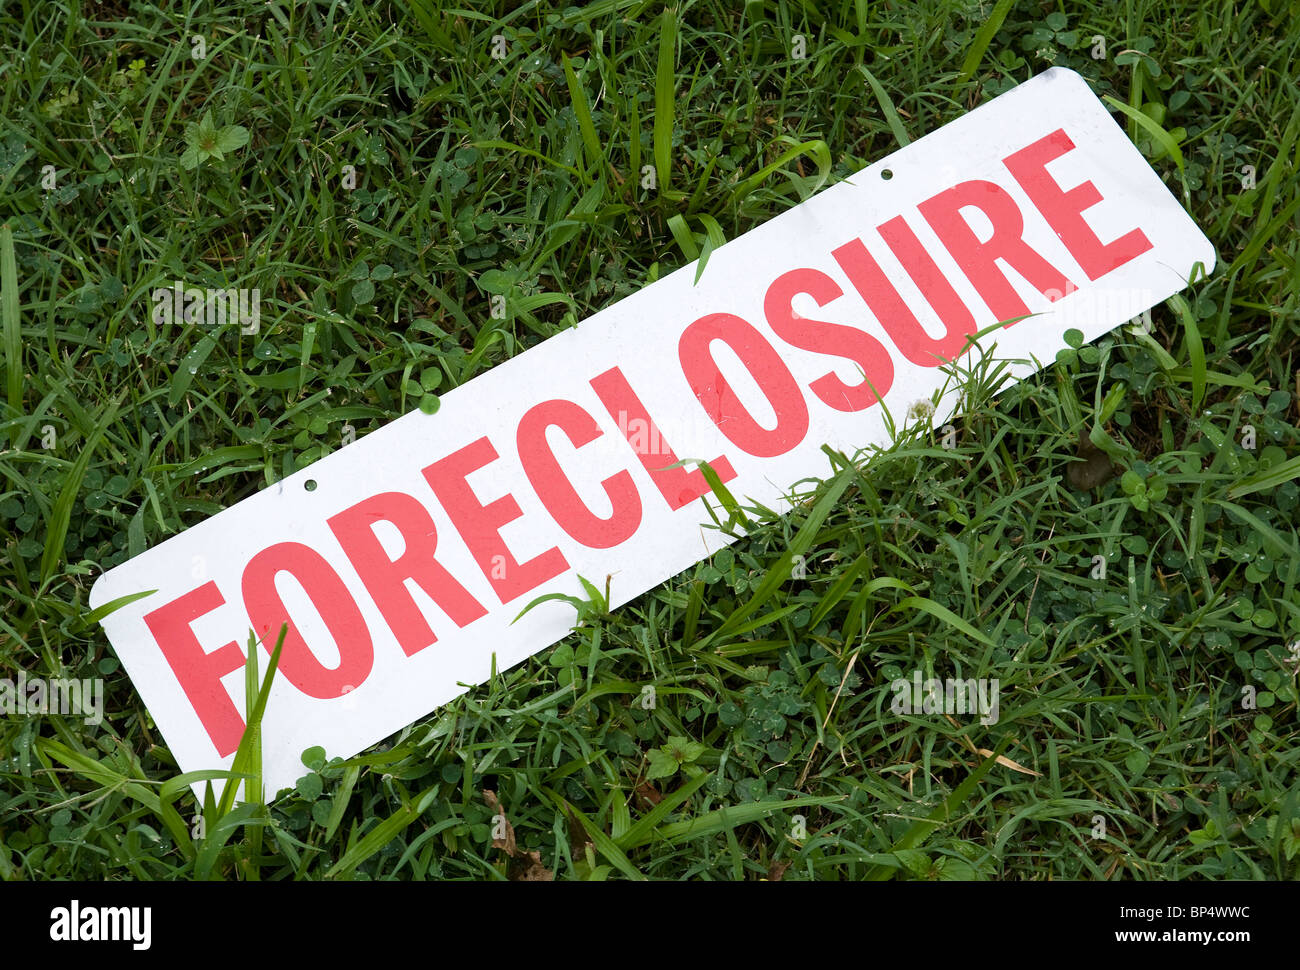 A foreclosure sign. Stock Photo